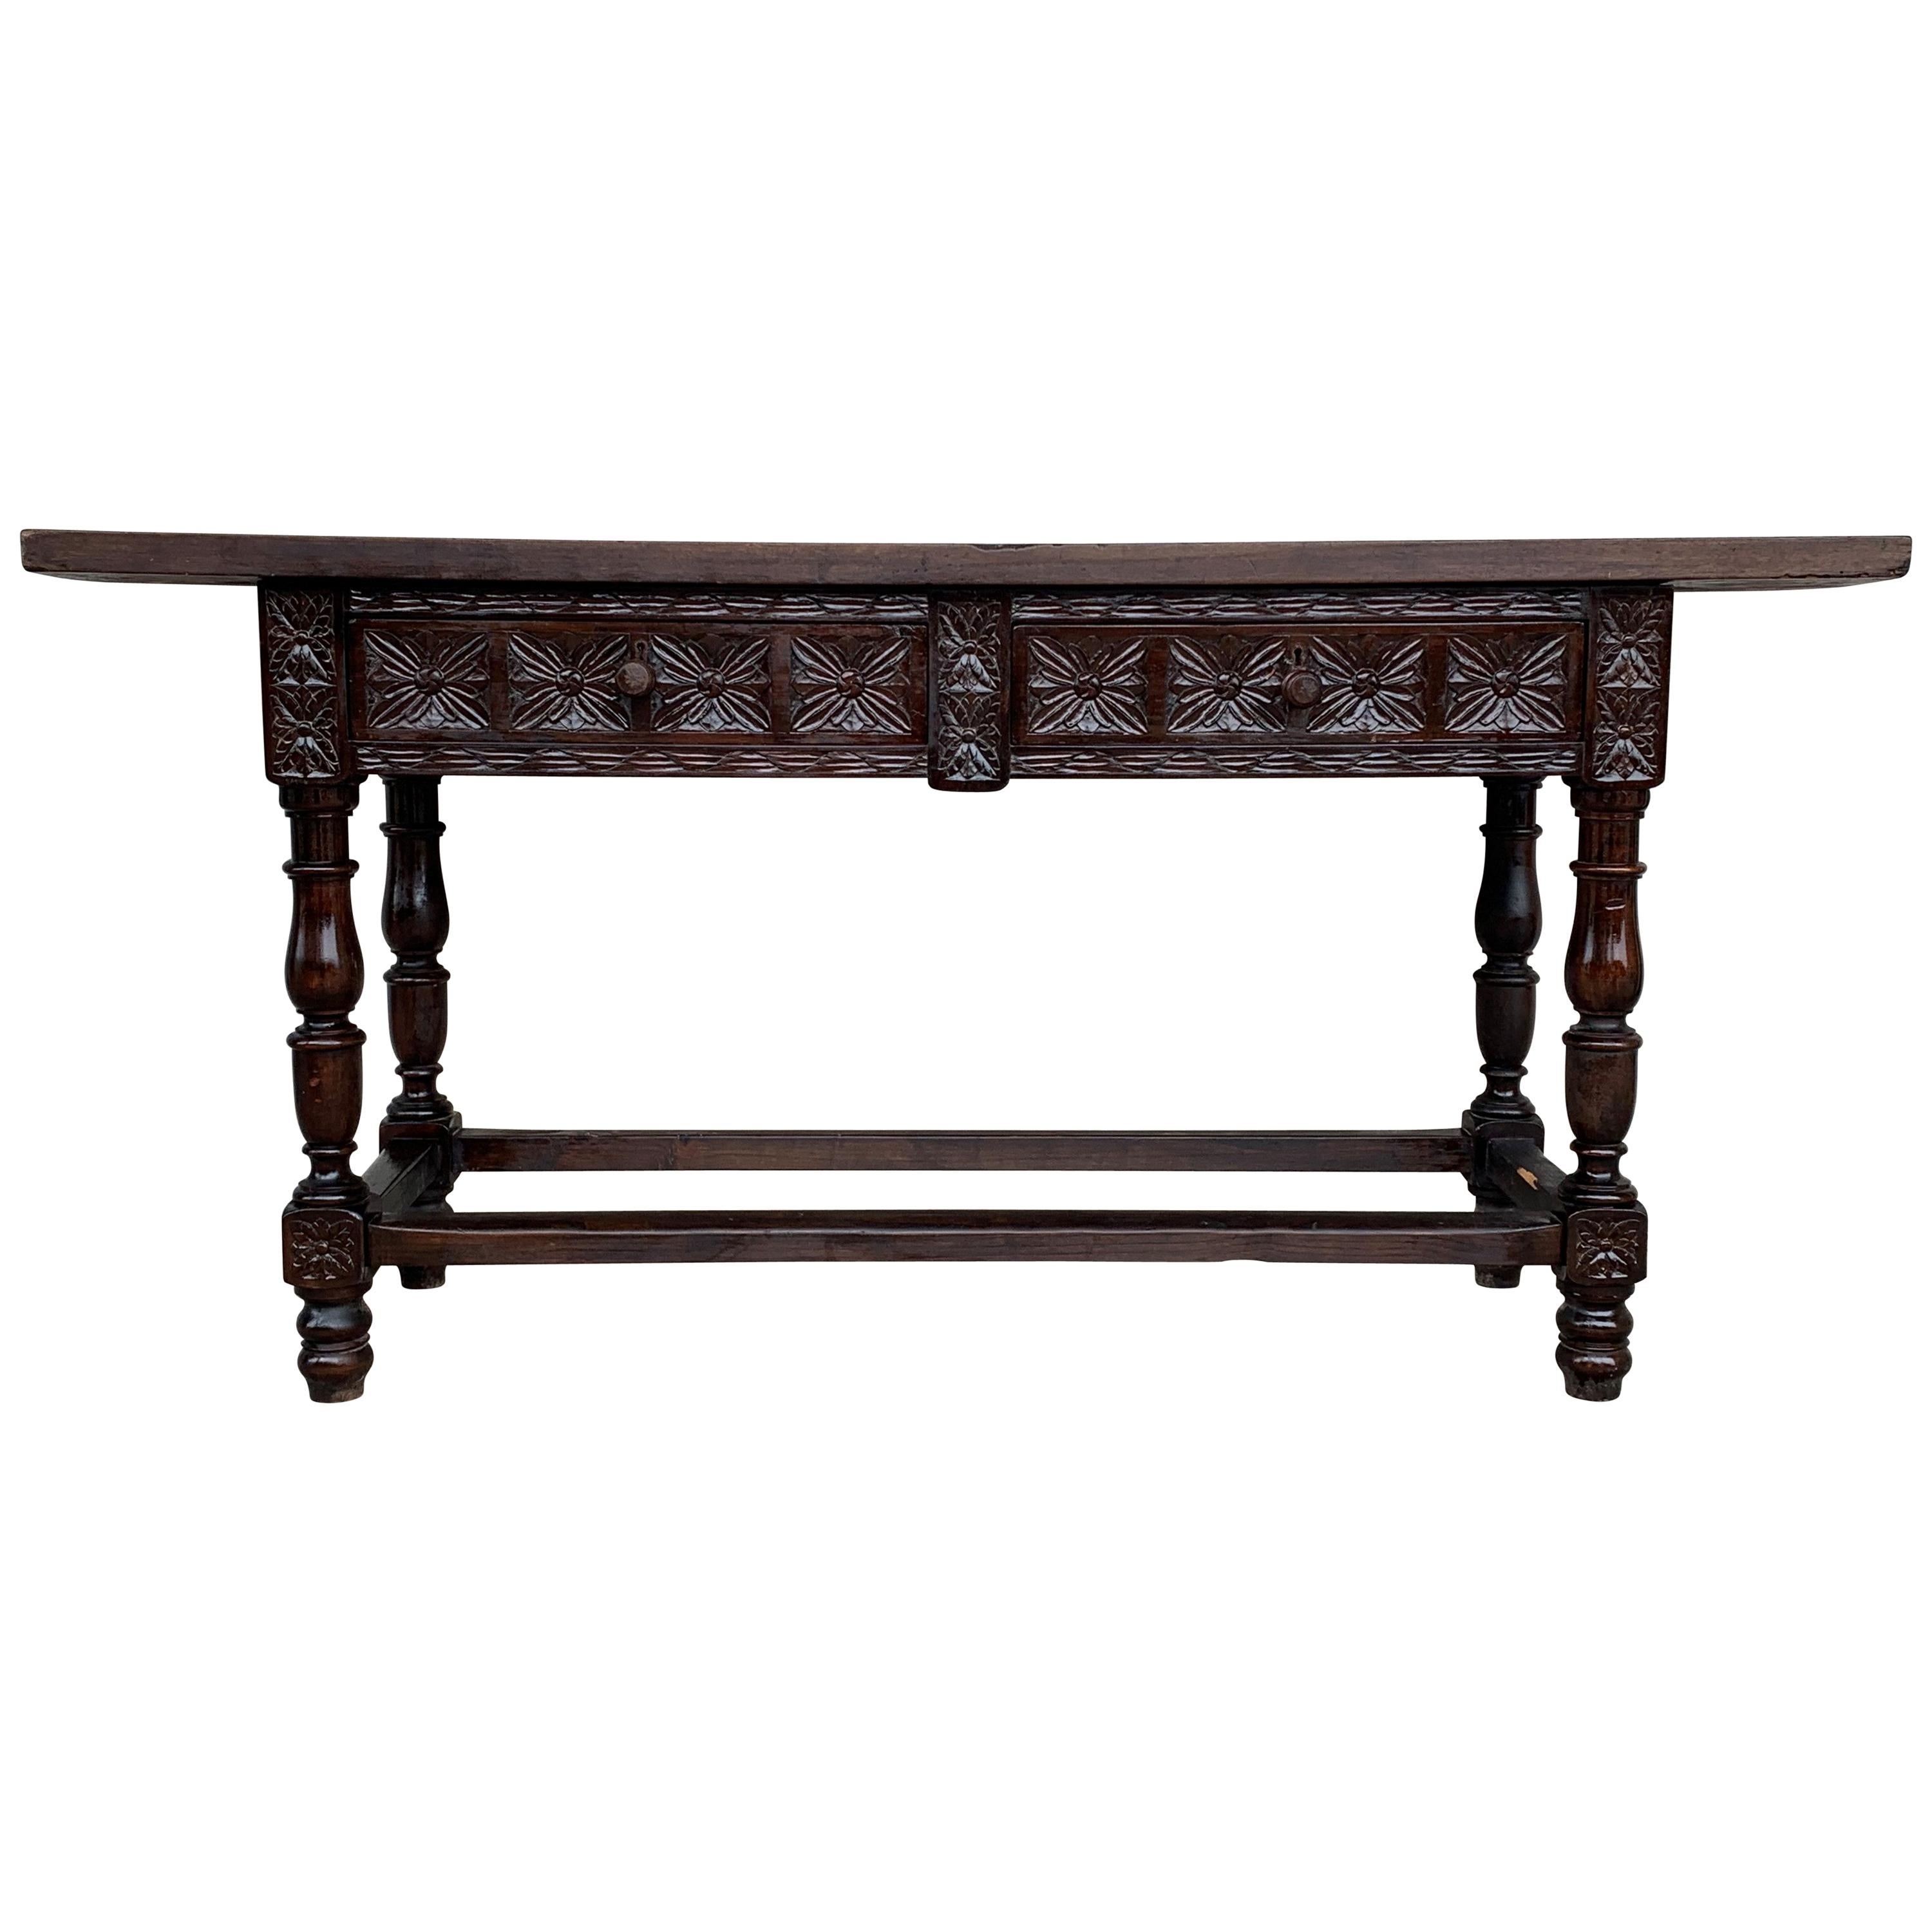 18th Century Spanish Refectory Table or Farm Table with Drawers